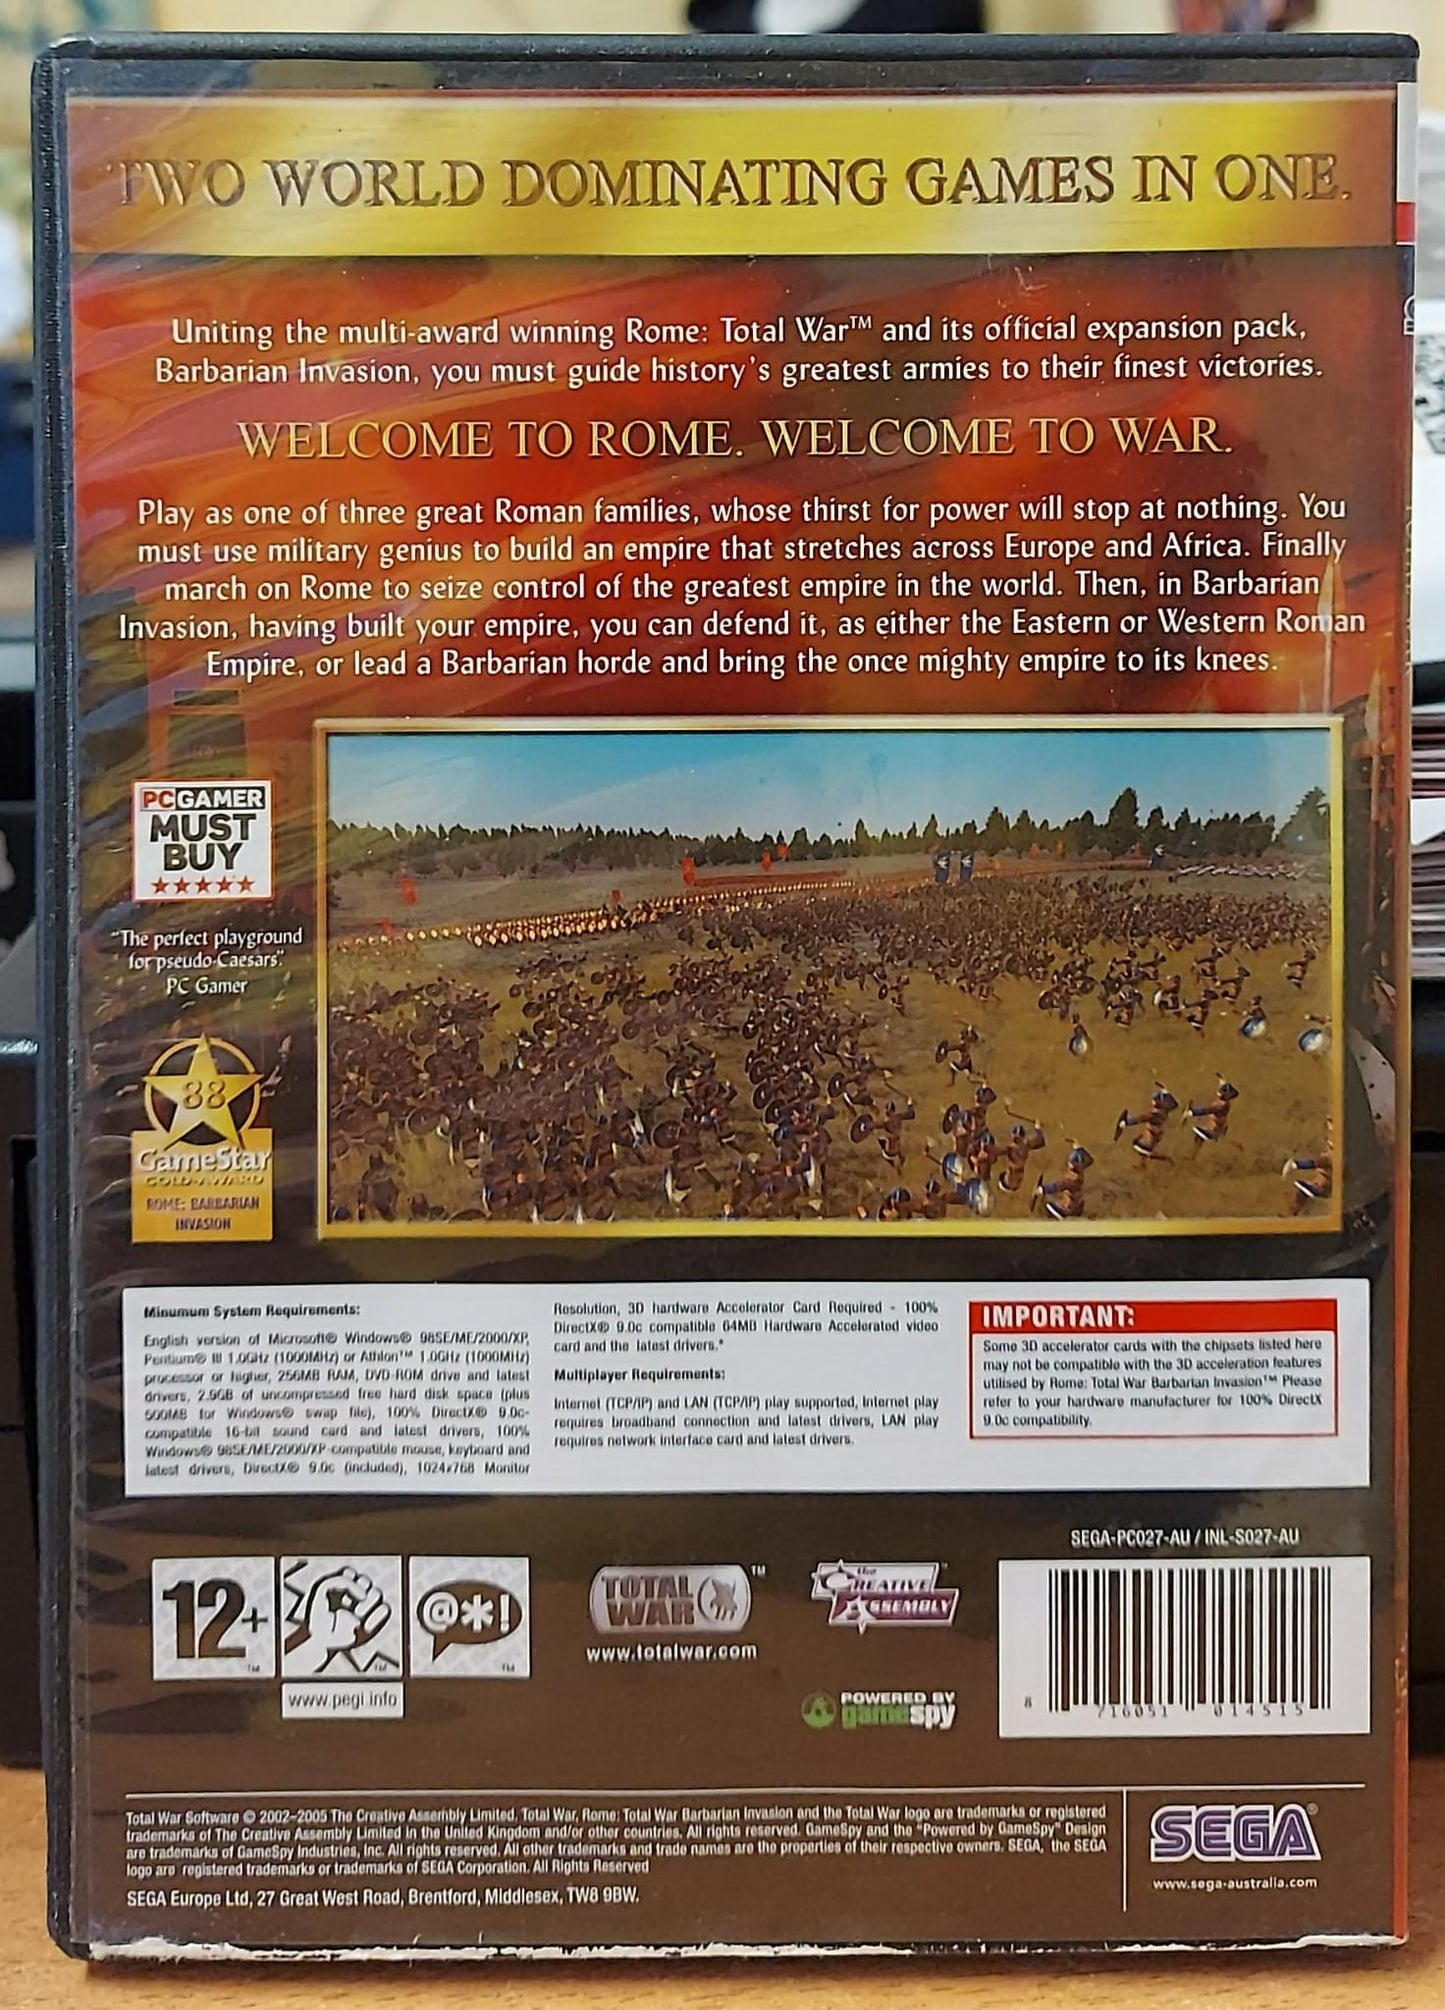 ROME TOTAL WAR GOLD EDITION